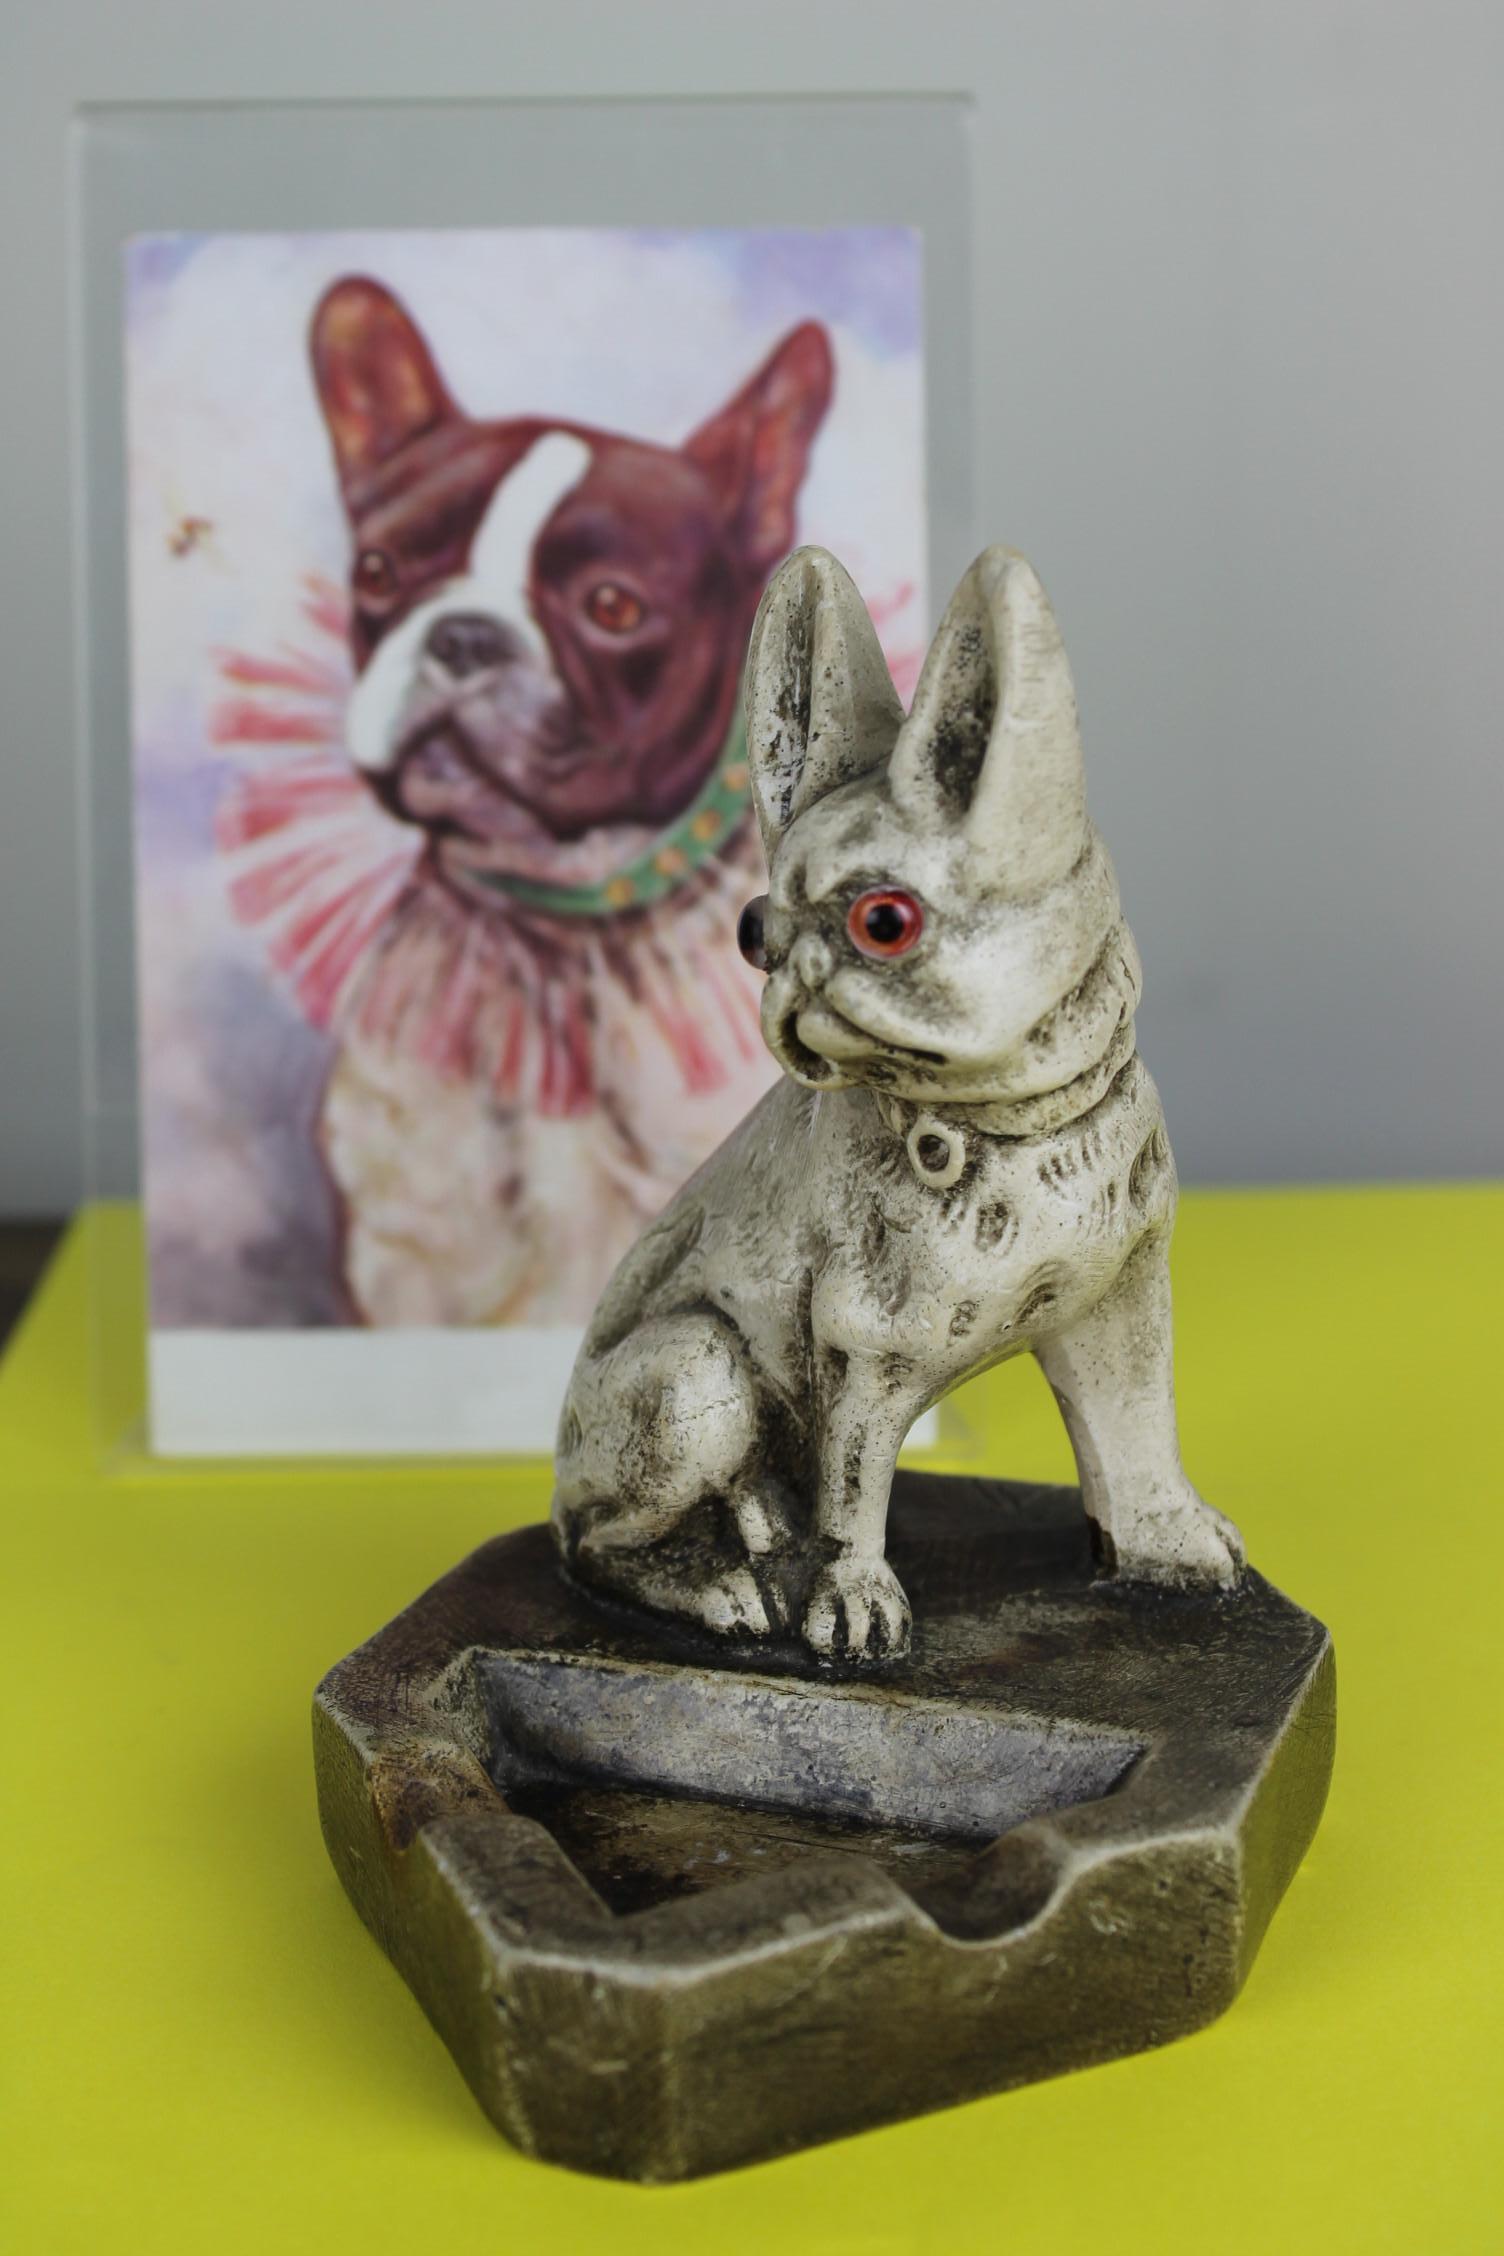 Art Deco Chalkware Ashtray with a French Bulldog Sculpture on. 
The Bulldog Statue has glass eyes and big ears.
This painted plaster ashtray from the Early 20th Century can be used as a desk accessory or be placed as a bulldog collectable sculpture.